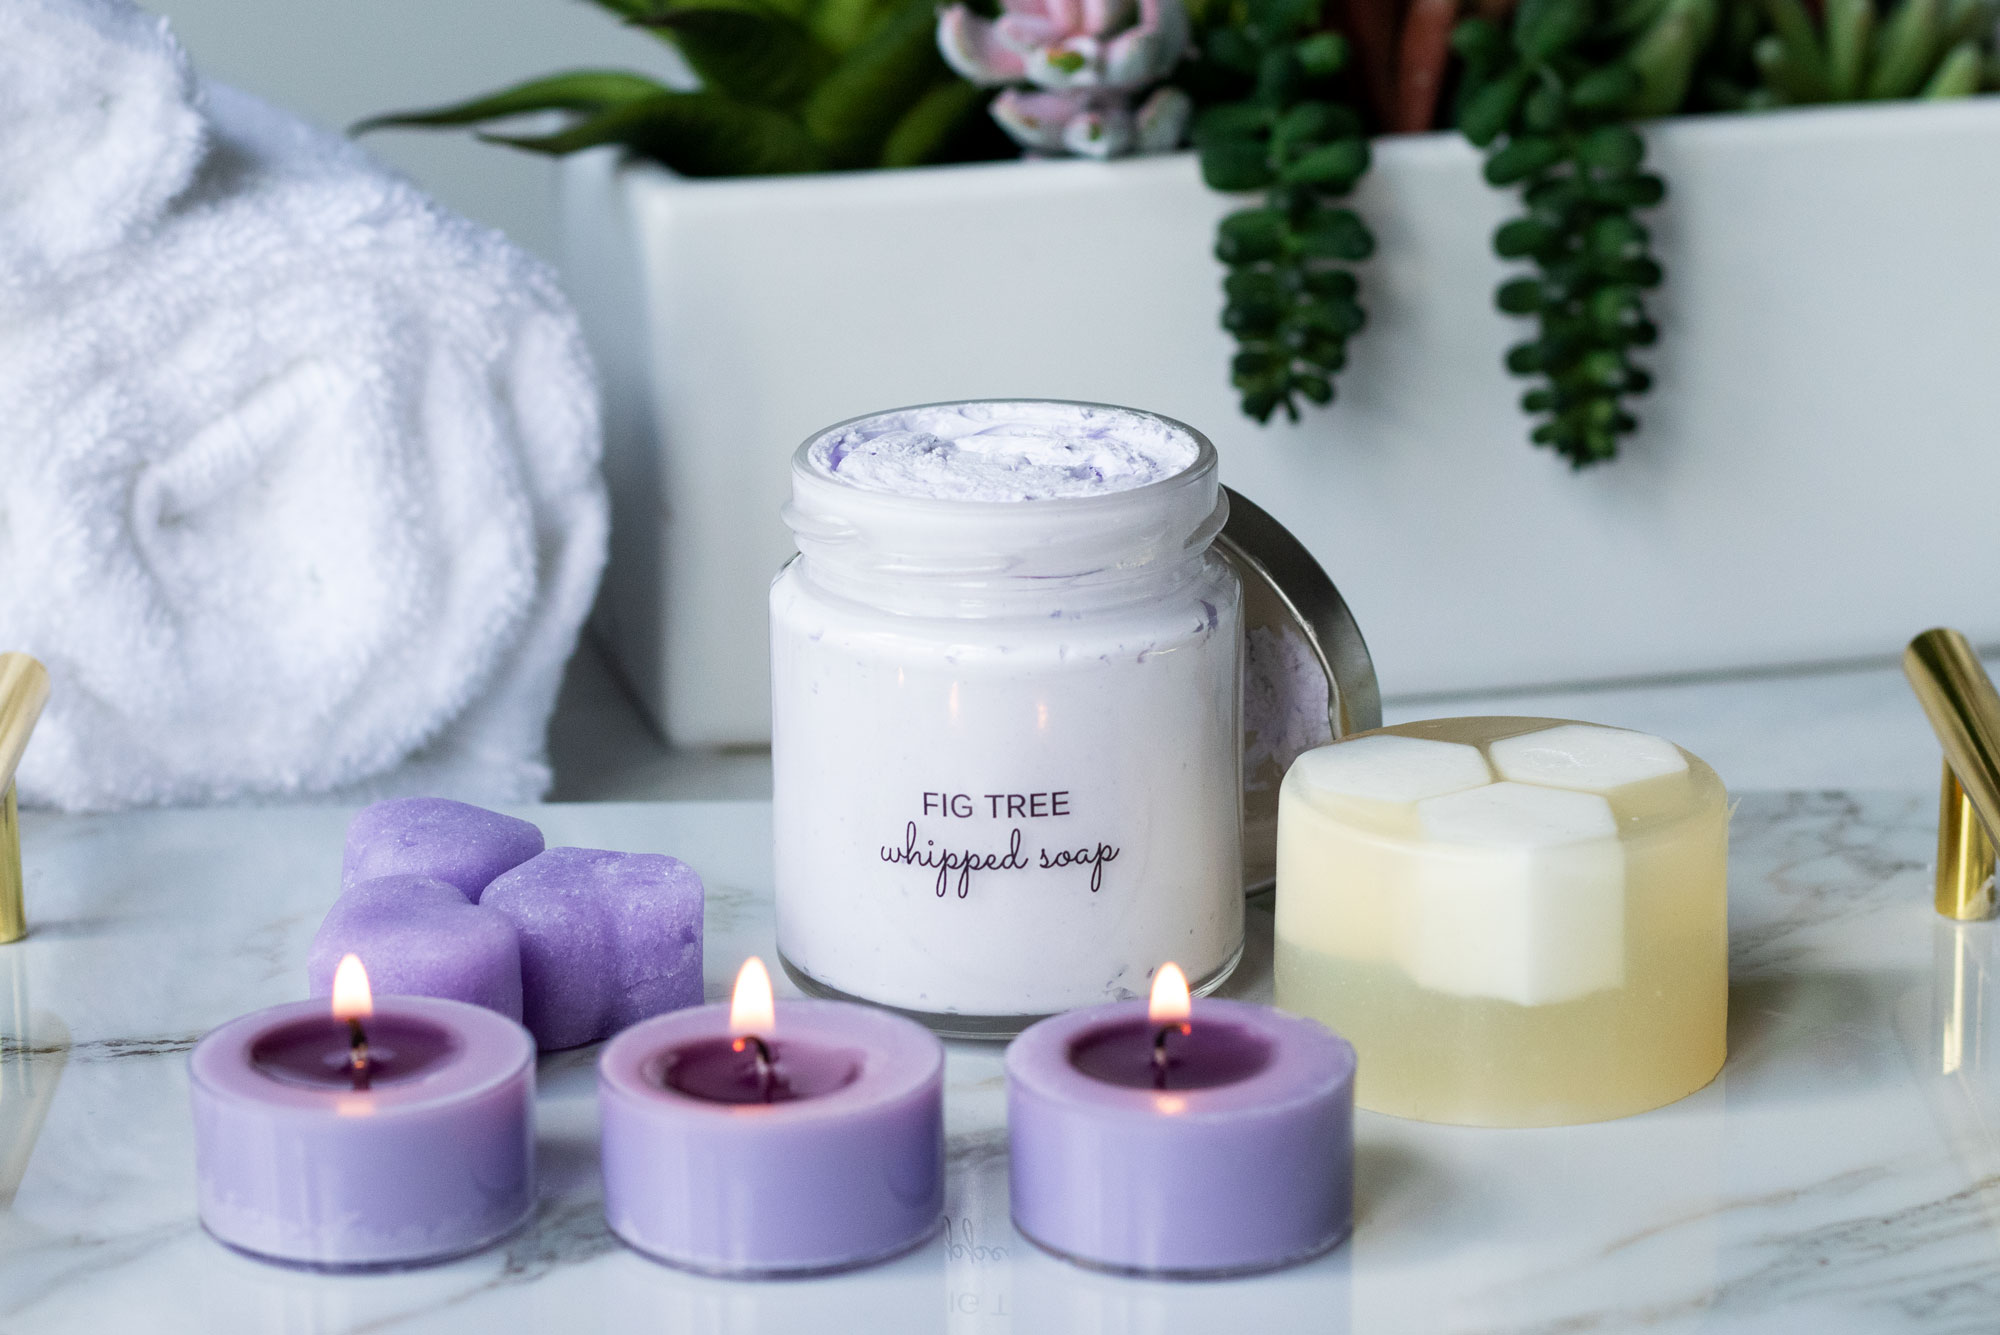 Spa Day Project with Tealight Candles, Whipped Bath Soaps  